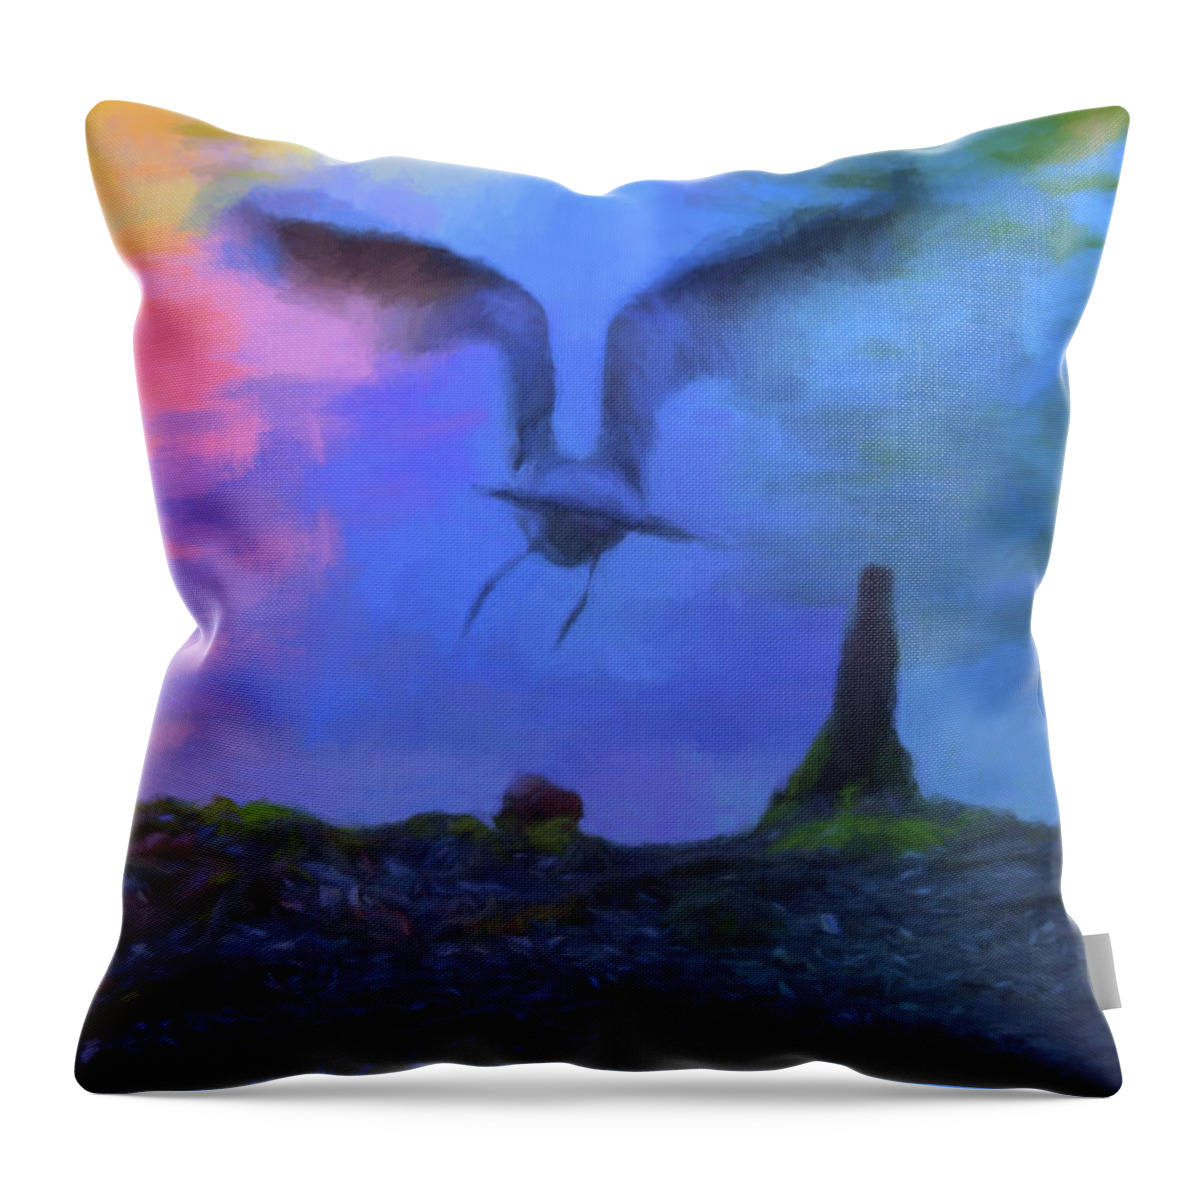 Sea Gulls Throw Pillow featuring the photograph Sea Gull Abstract by Jan Amiss Photography